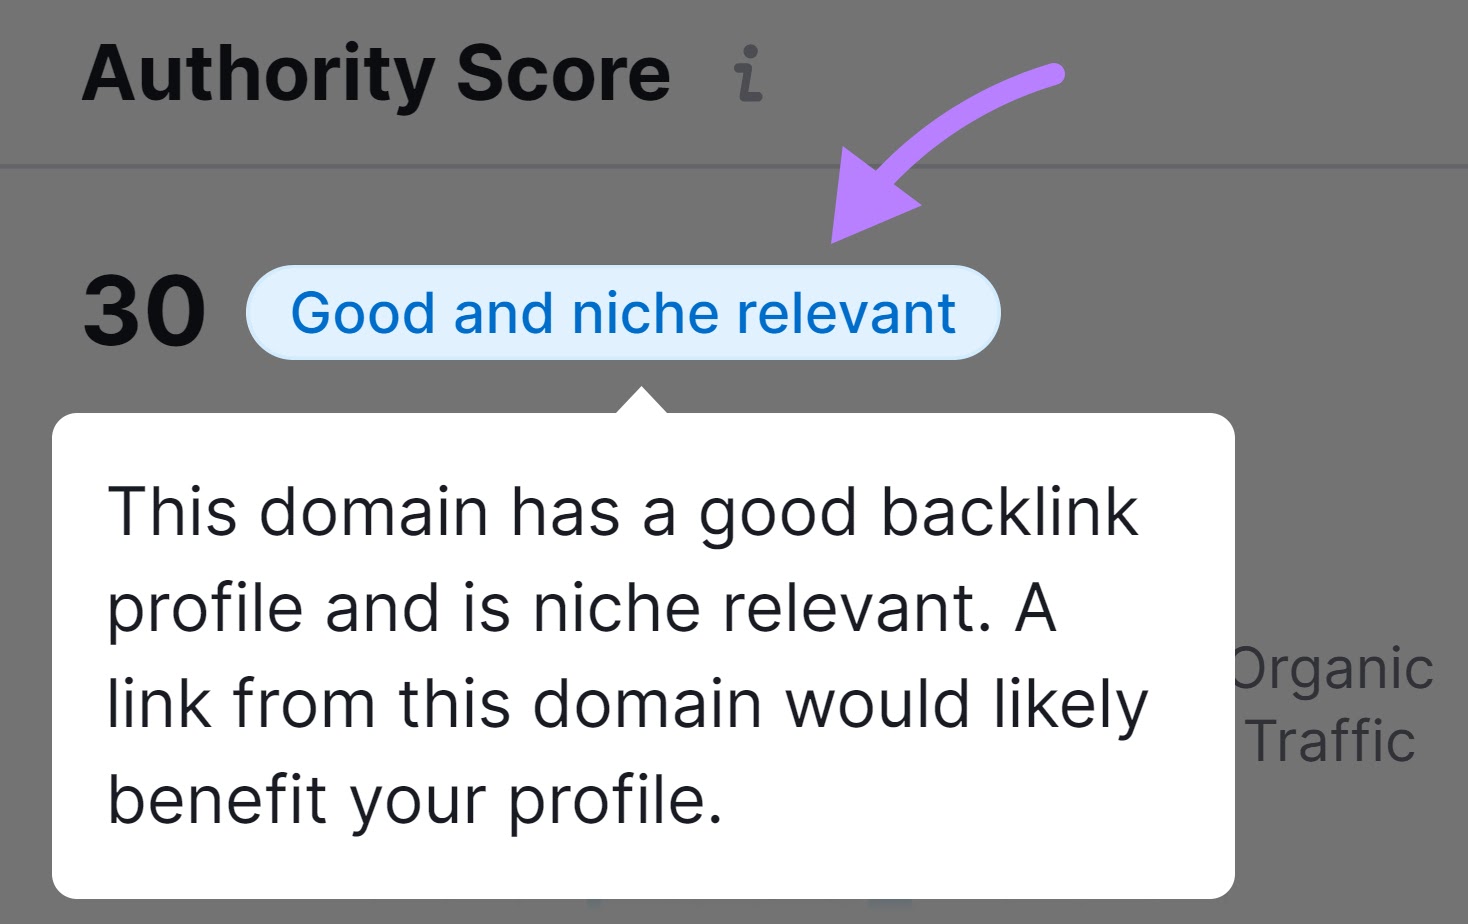 Hovering over "Good and niche relevant" explains the AS in more detail